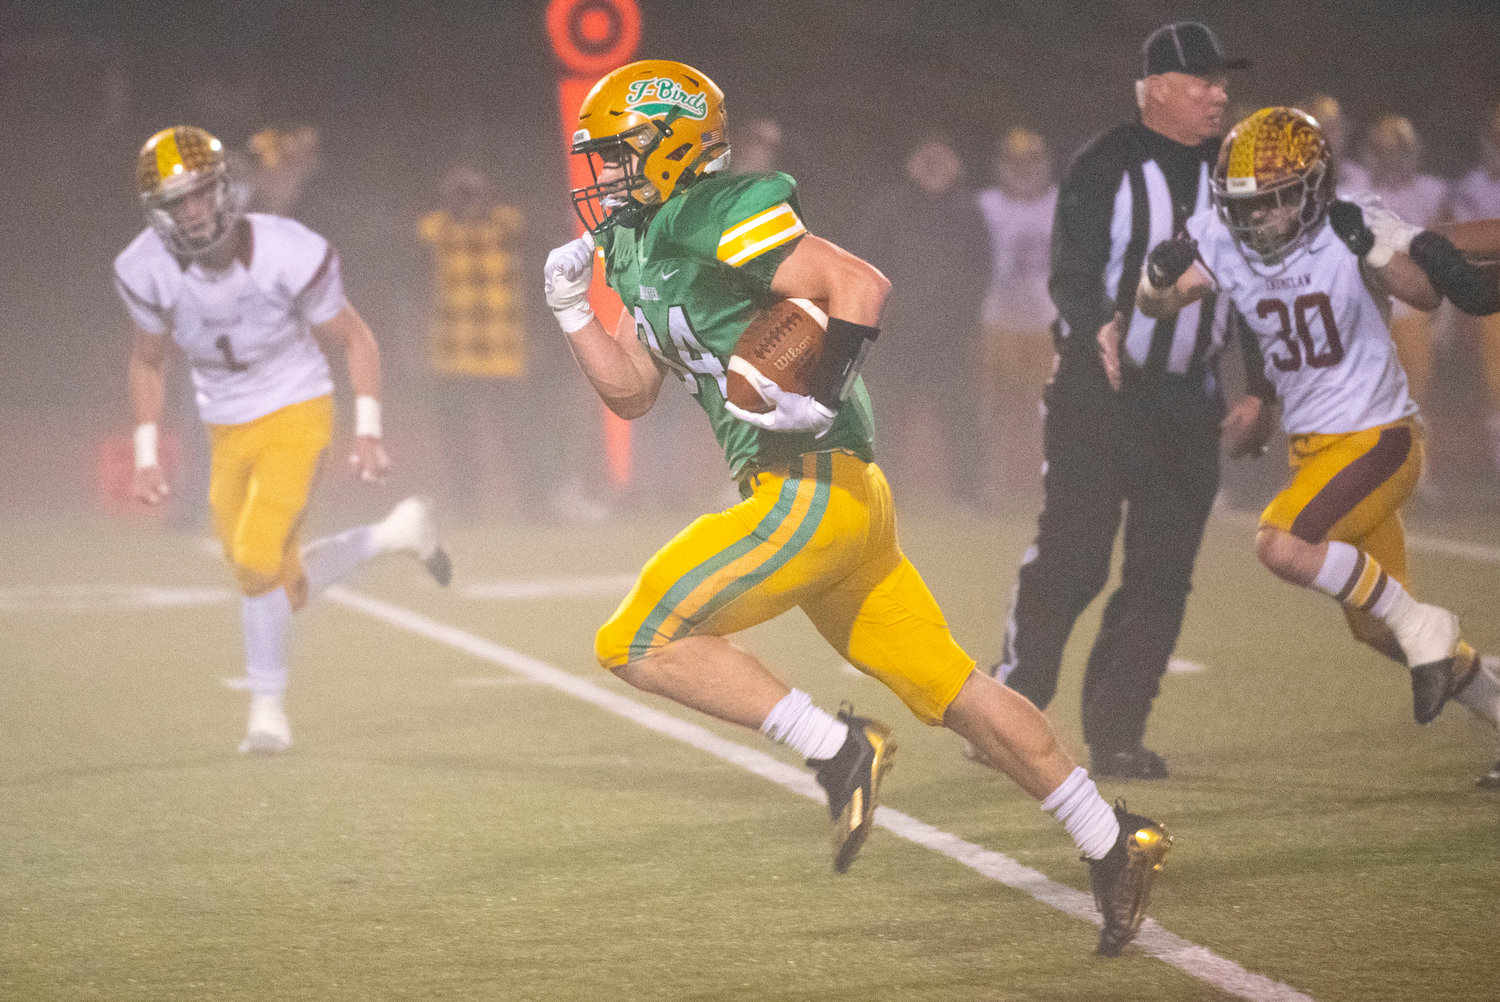 Tumwater’s Payton Hoyt takes off on a punt return against Enumclaw Nov. 19.